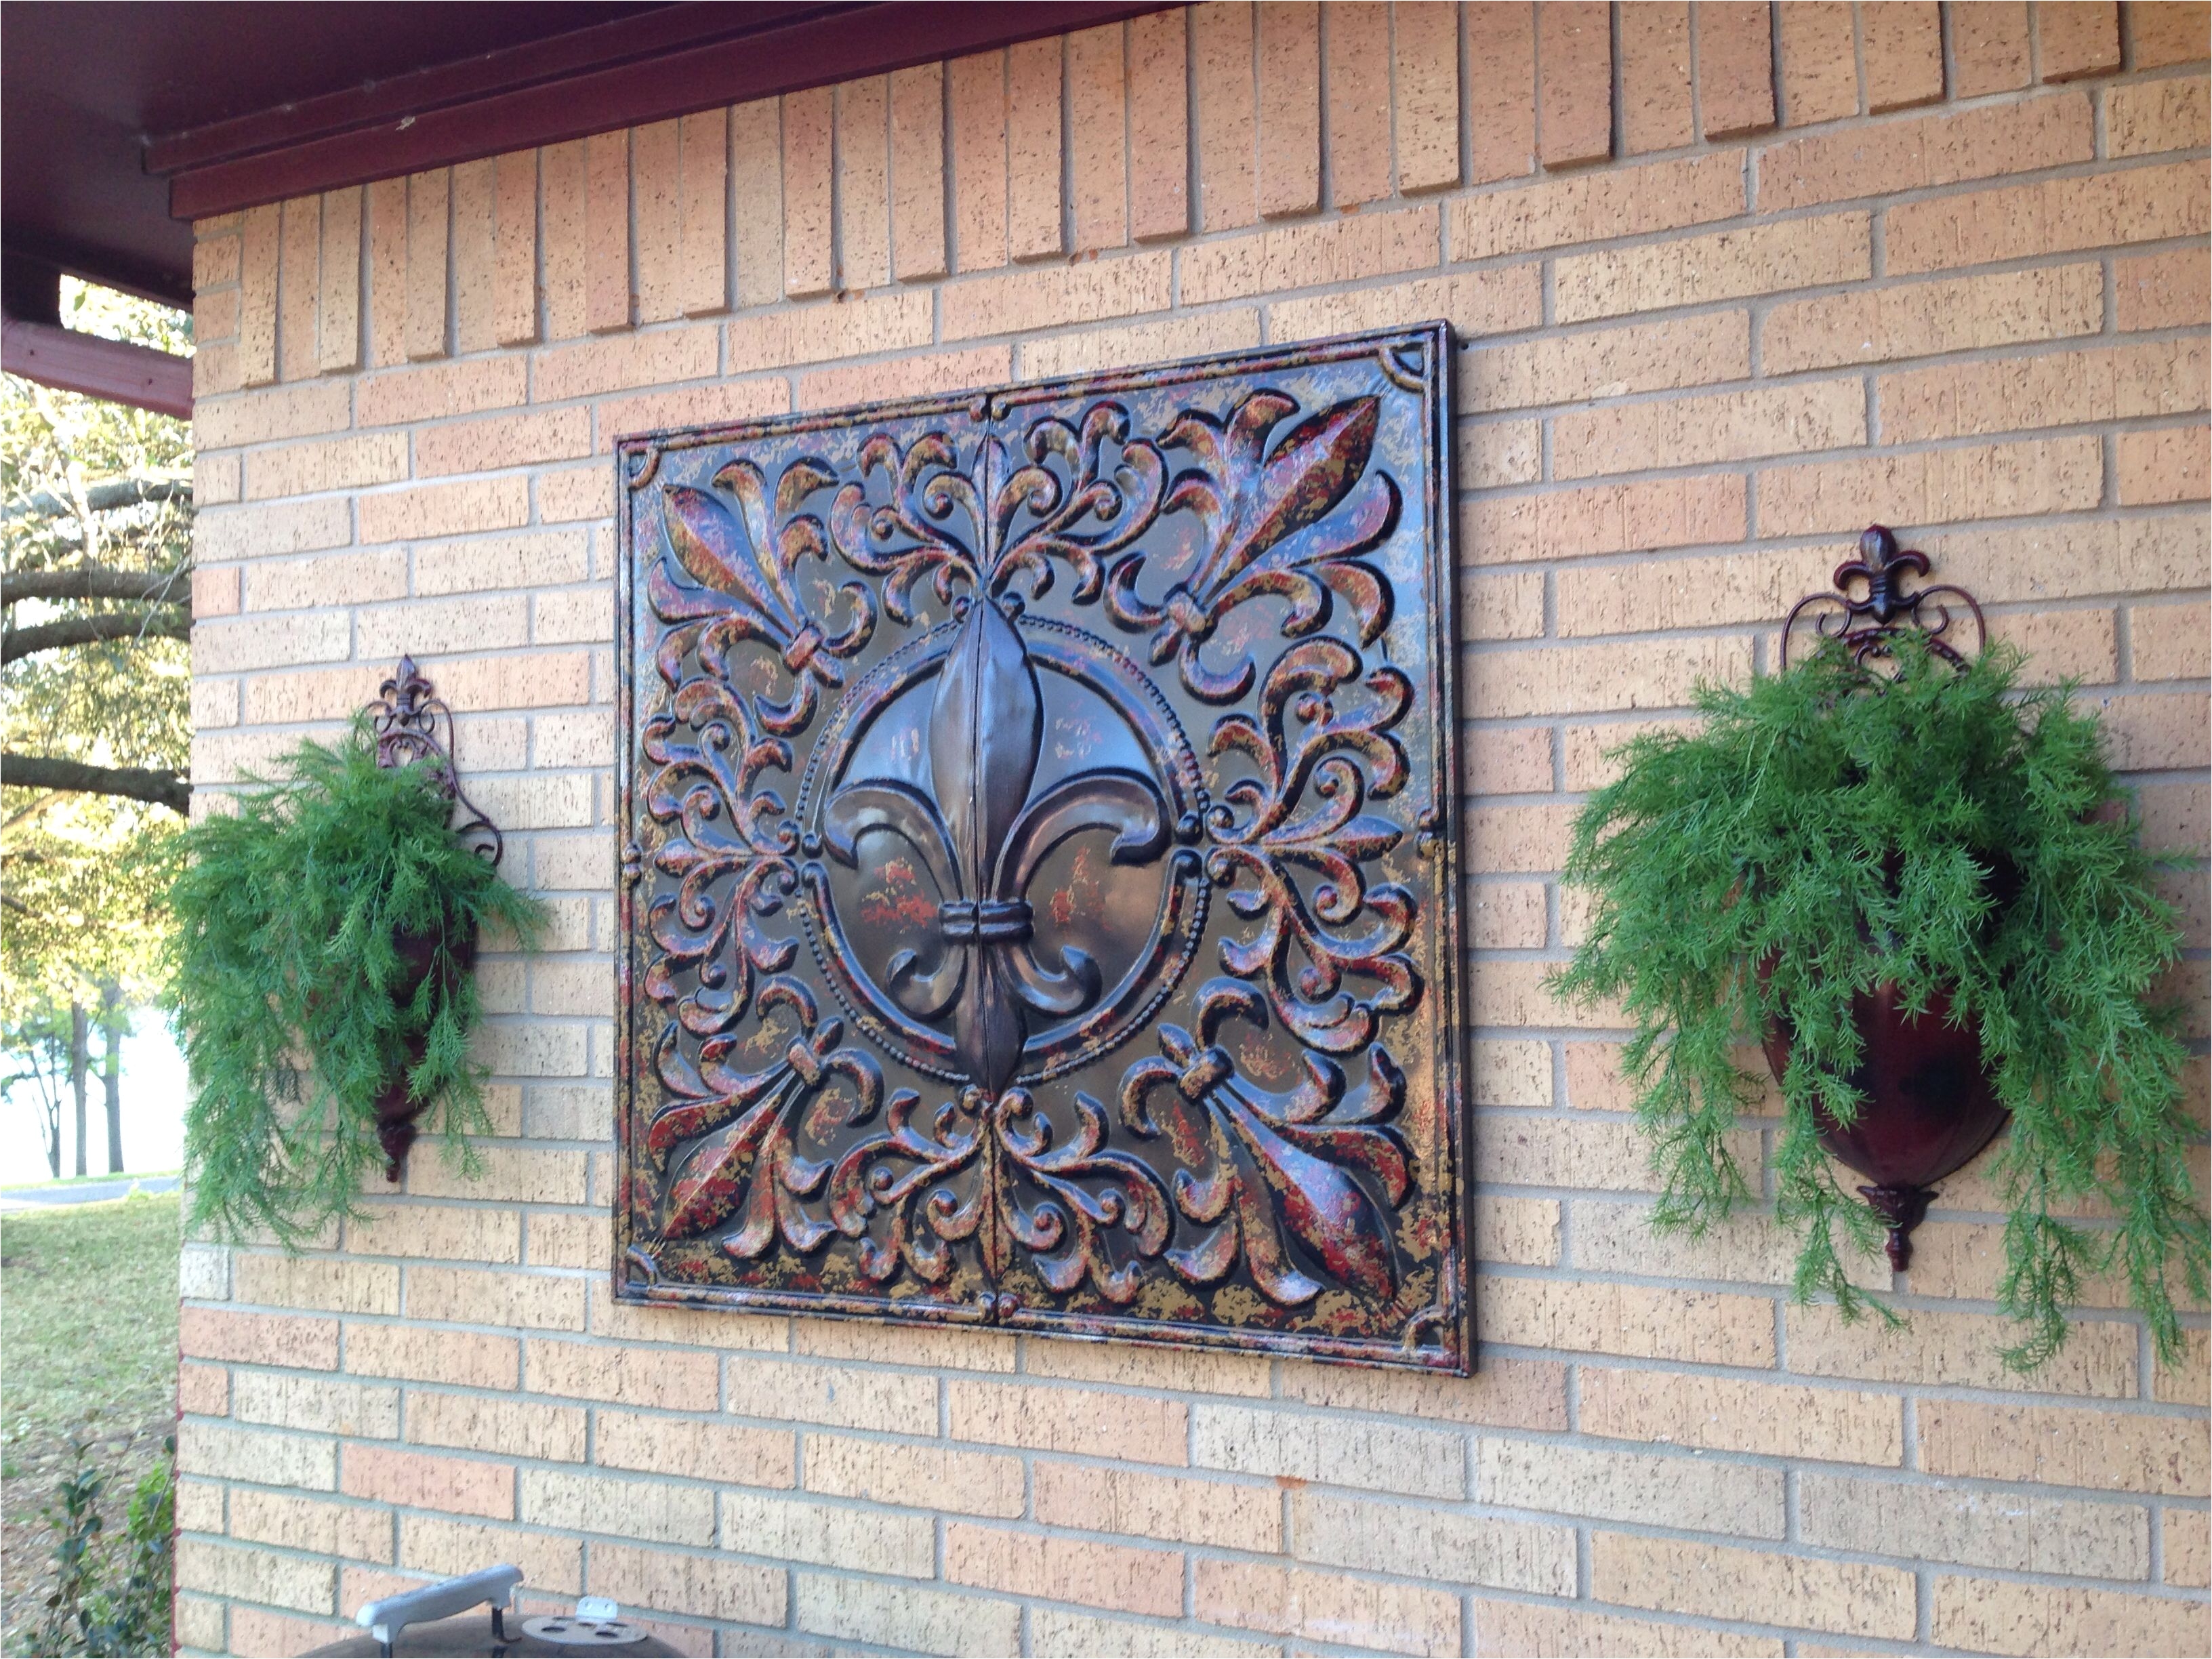 fleur d lis metal art bought hobby lobby for 50 off metal wall sconces found garden ridge i spray painted them to match